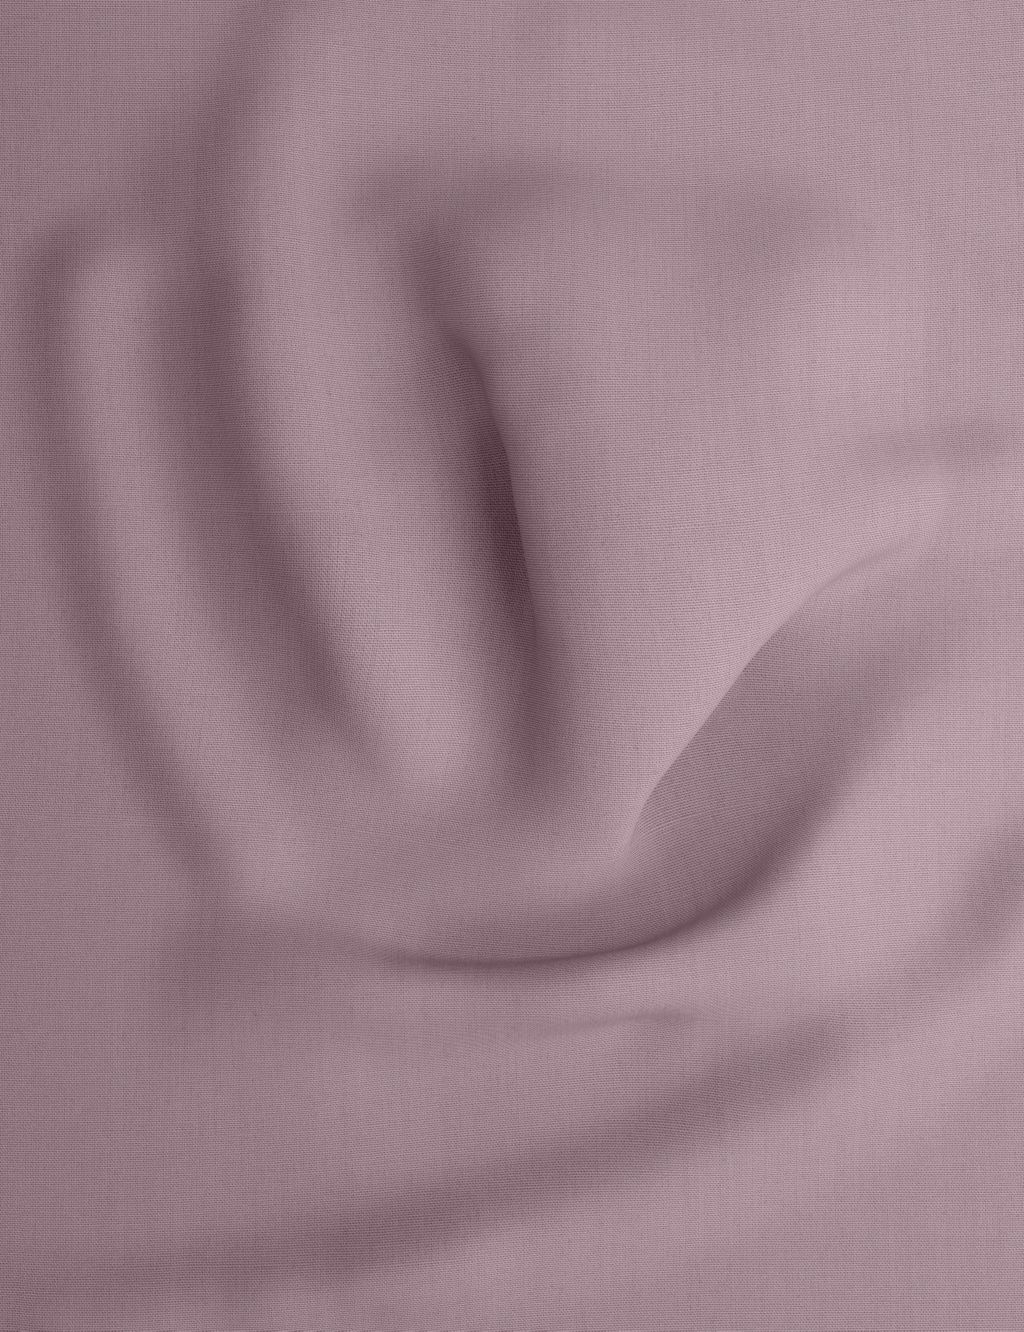 Comfortably Cool Lyocel Rich Deep Fitted Sheet image 2